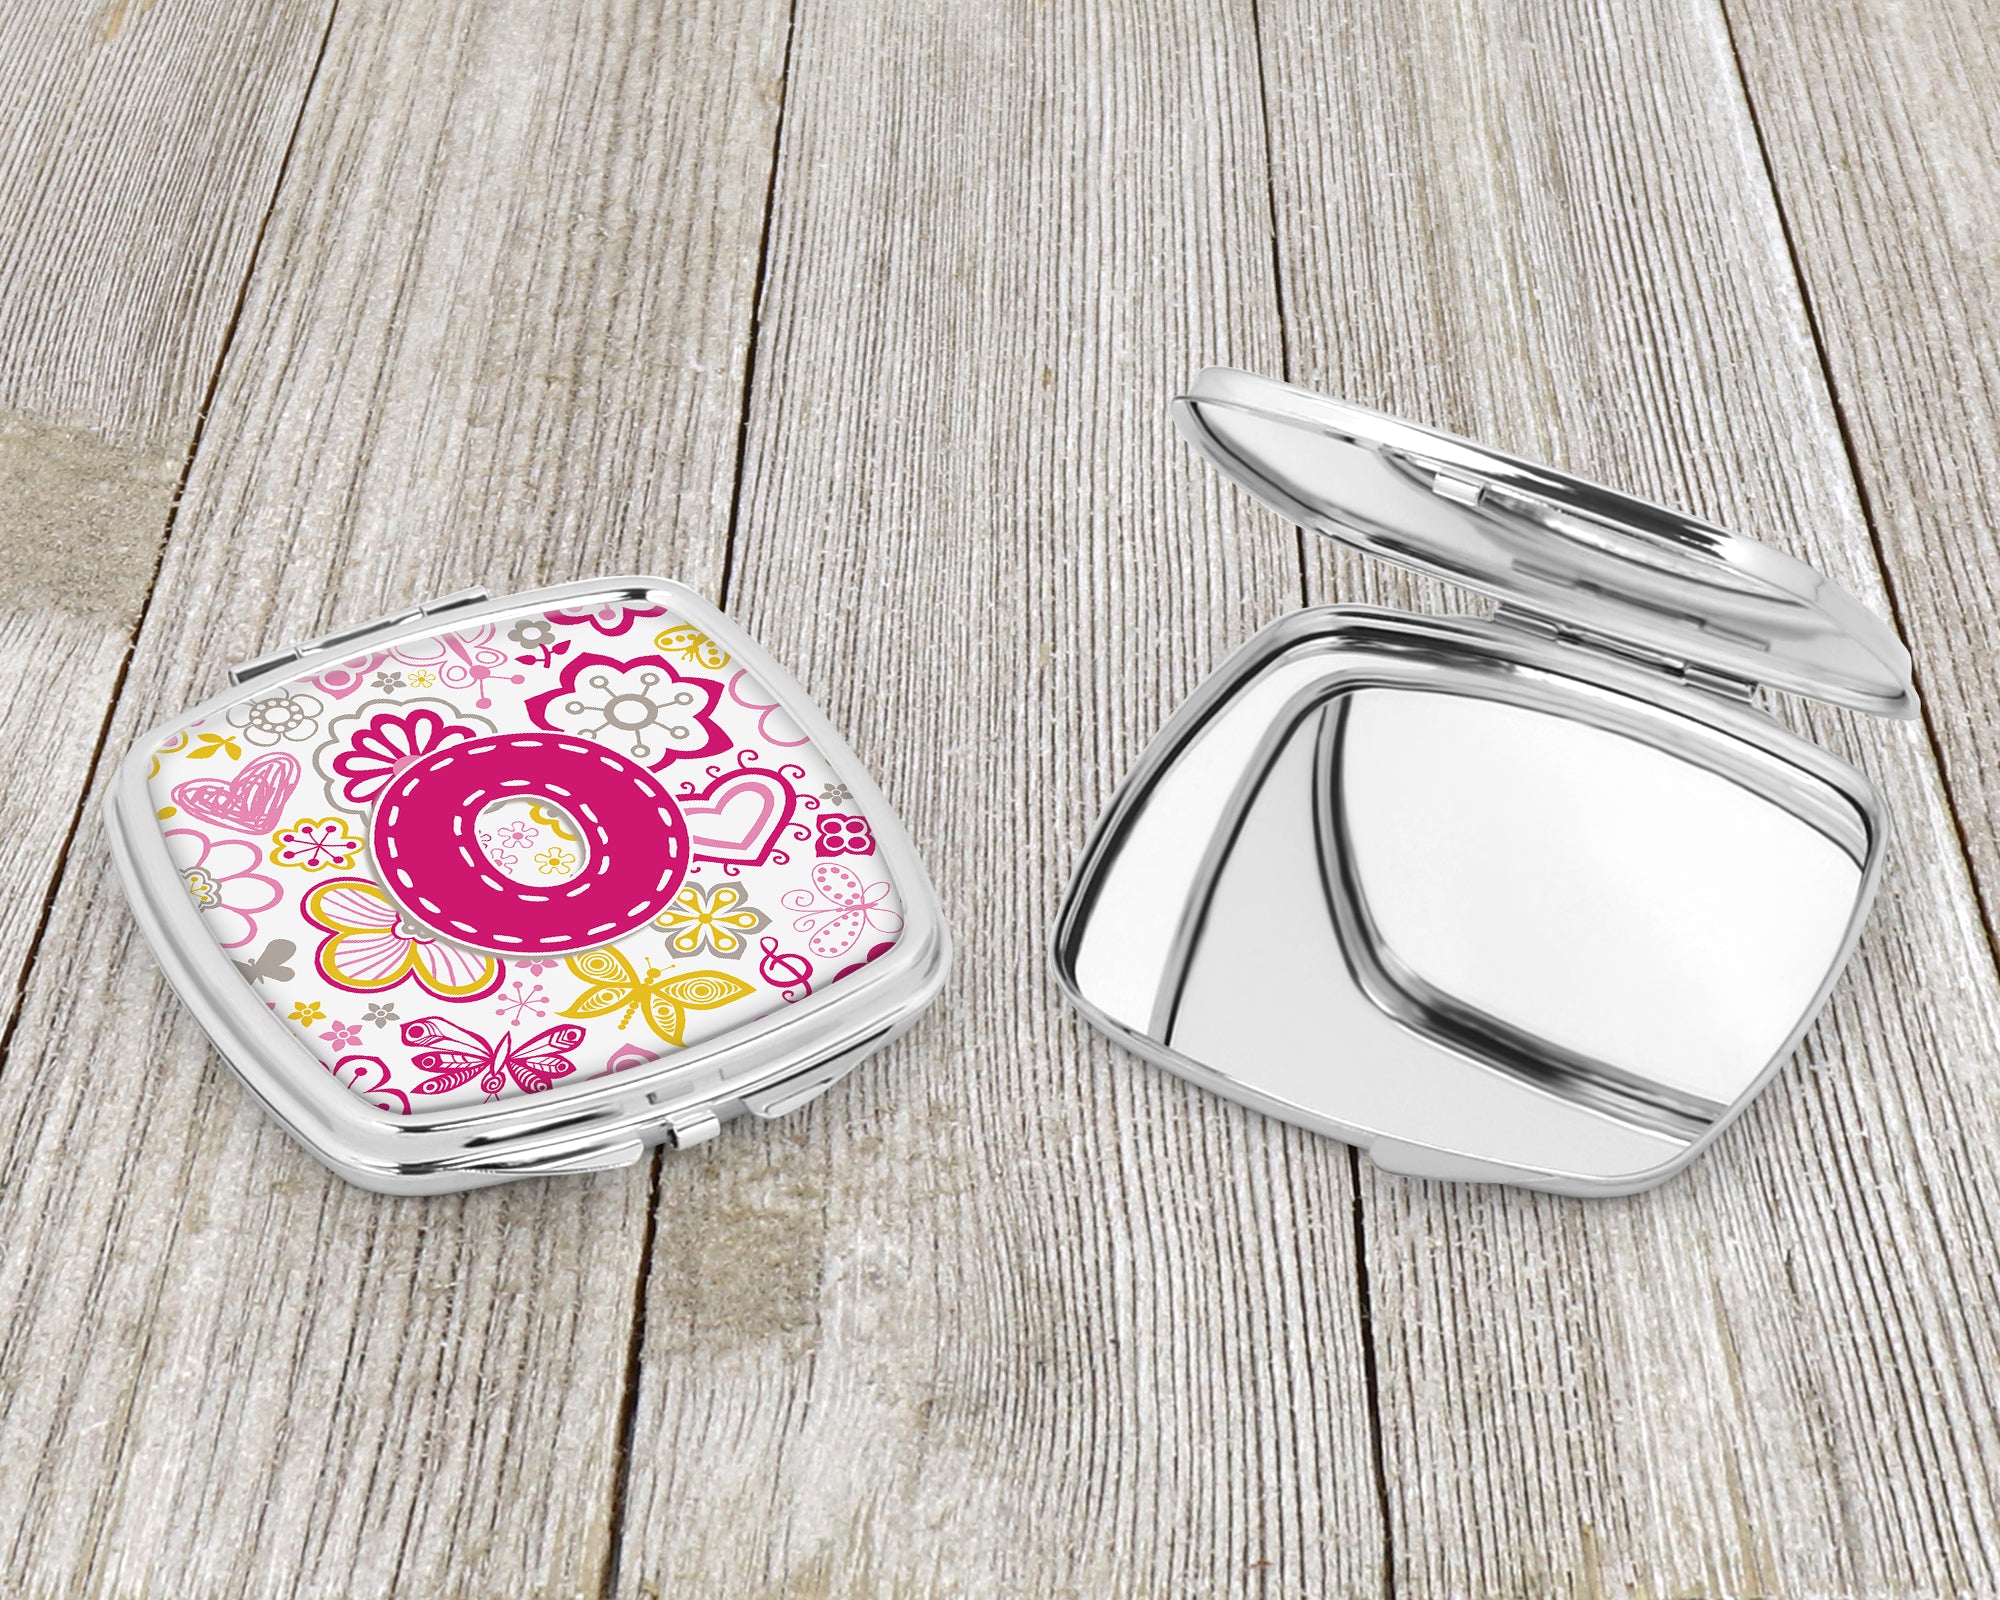 Letter O Flowers and Butterflies Pink Compact Mirror CJ2005-OSCM  the-store.com.